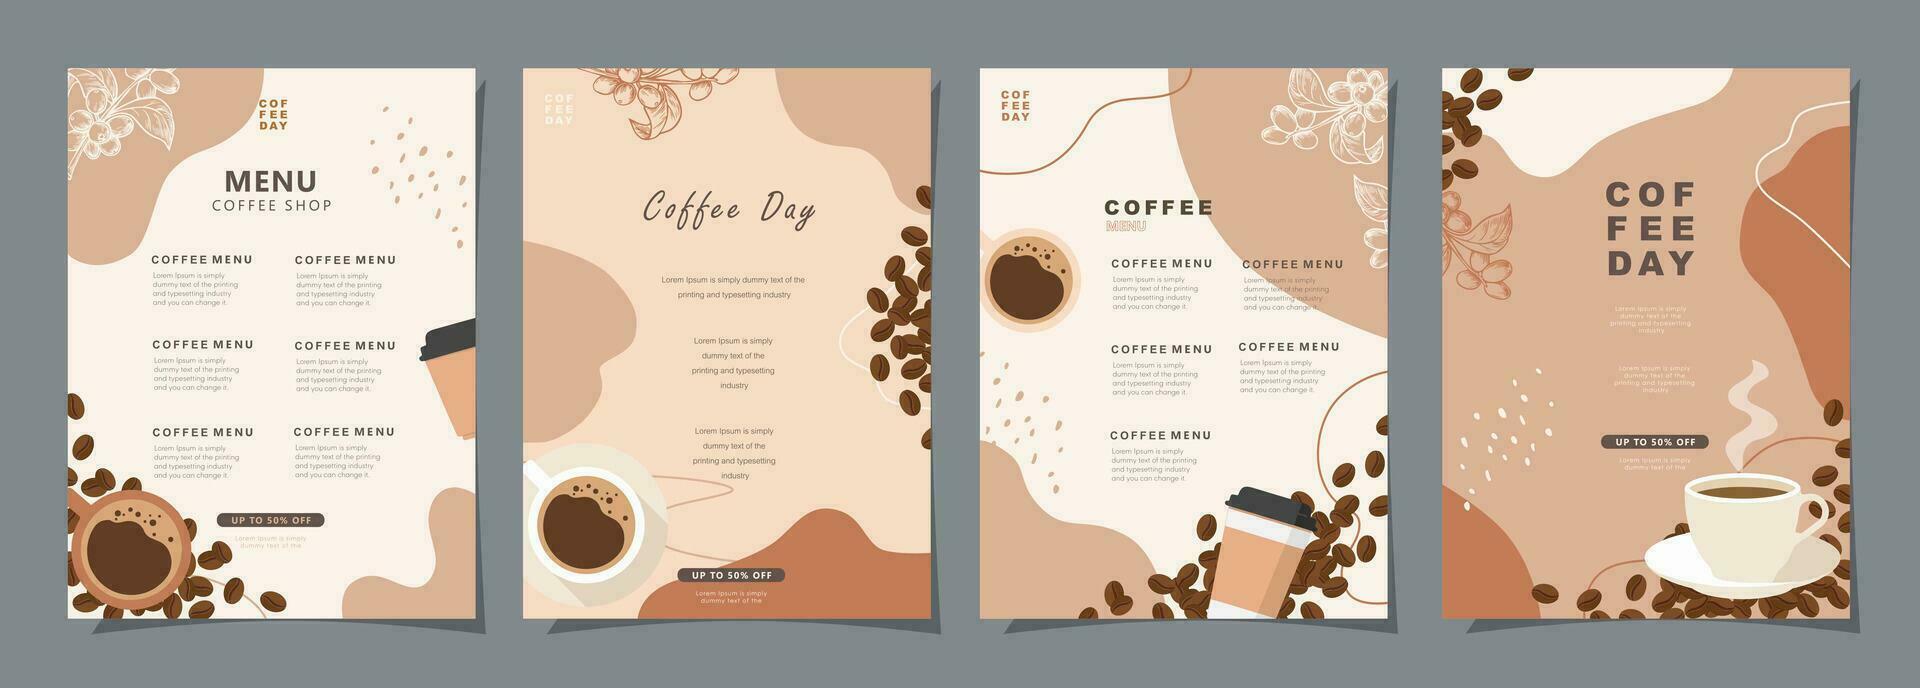 Set of sketch banners with coffee beans and leaves on colorful background for poster, cover, menu or another template design. vector illustration.